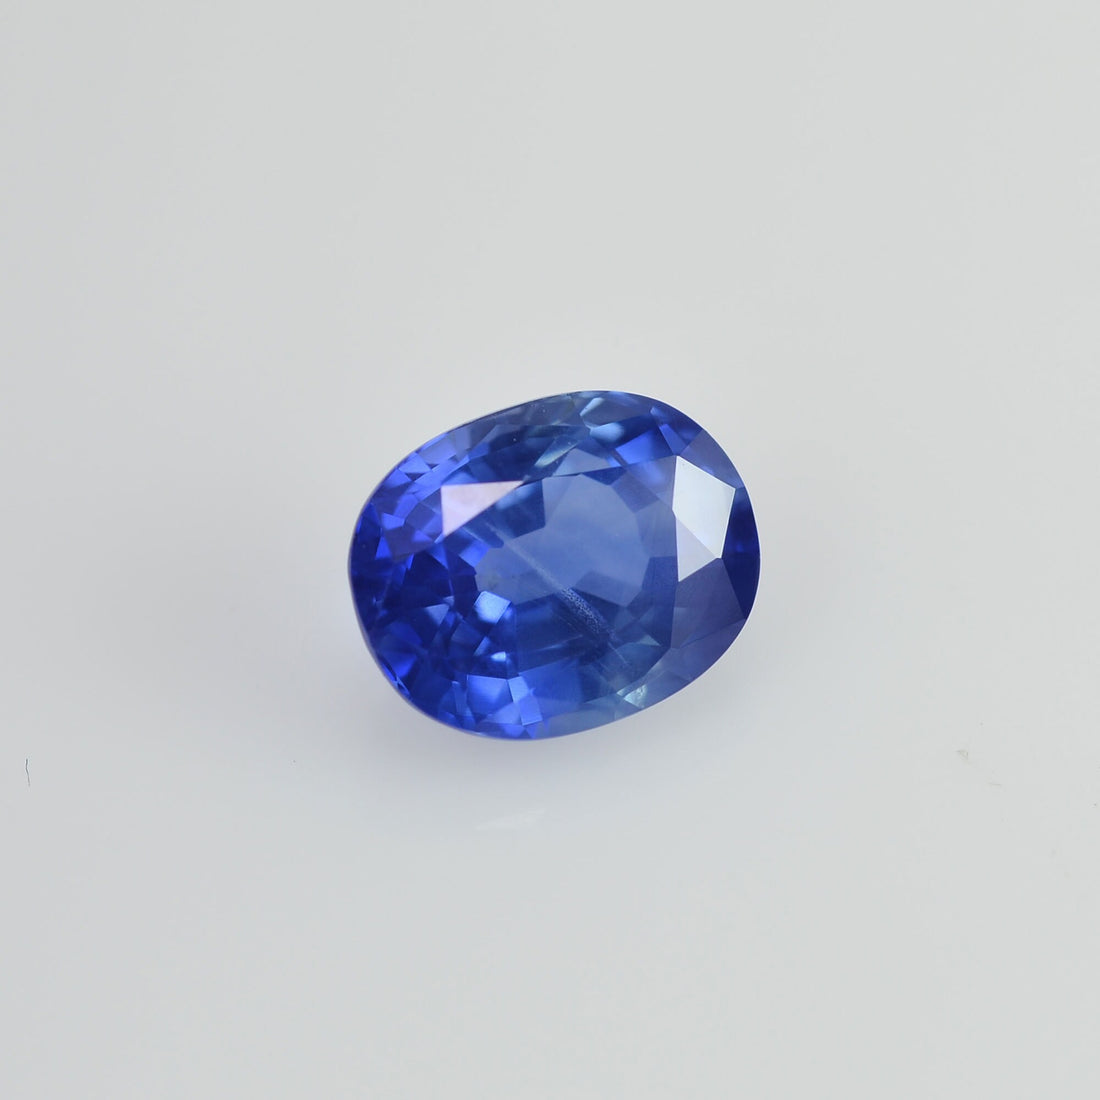 1.12 cts Unheated Natural Blue Sapphire Loose Gemstone Oval Cut